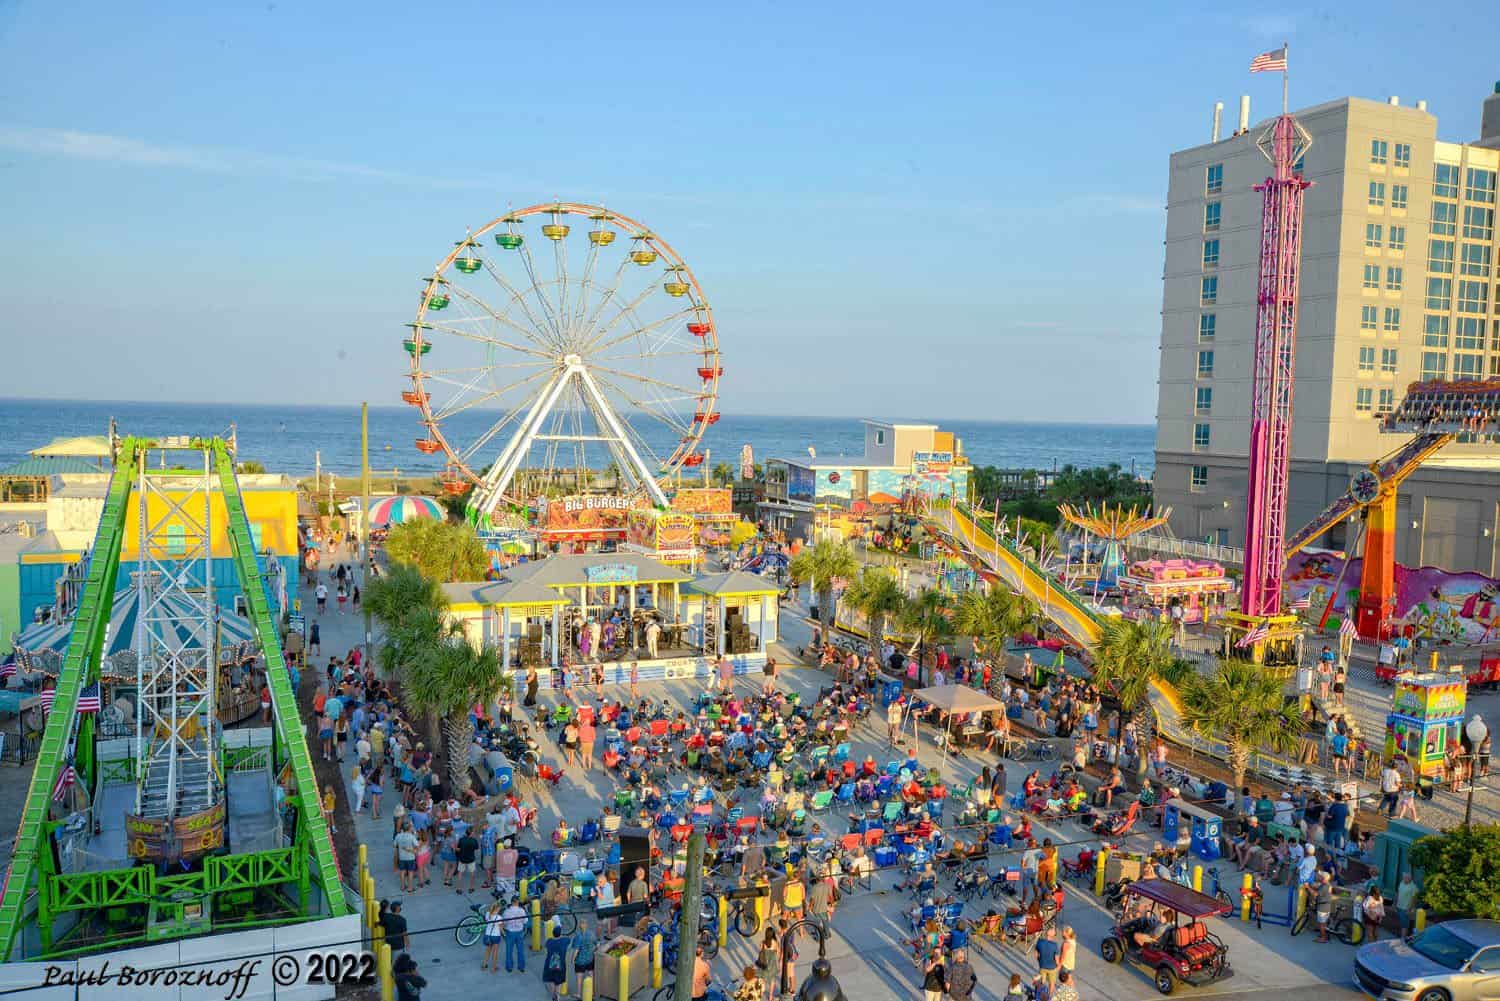 Carolina Beach Boardwalk activities and events available year round